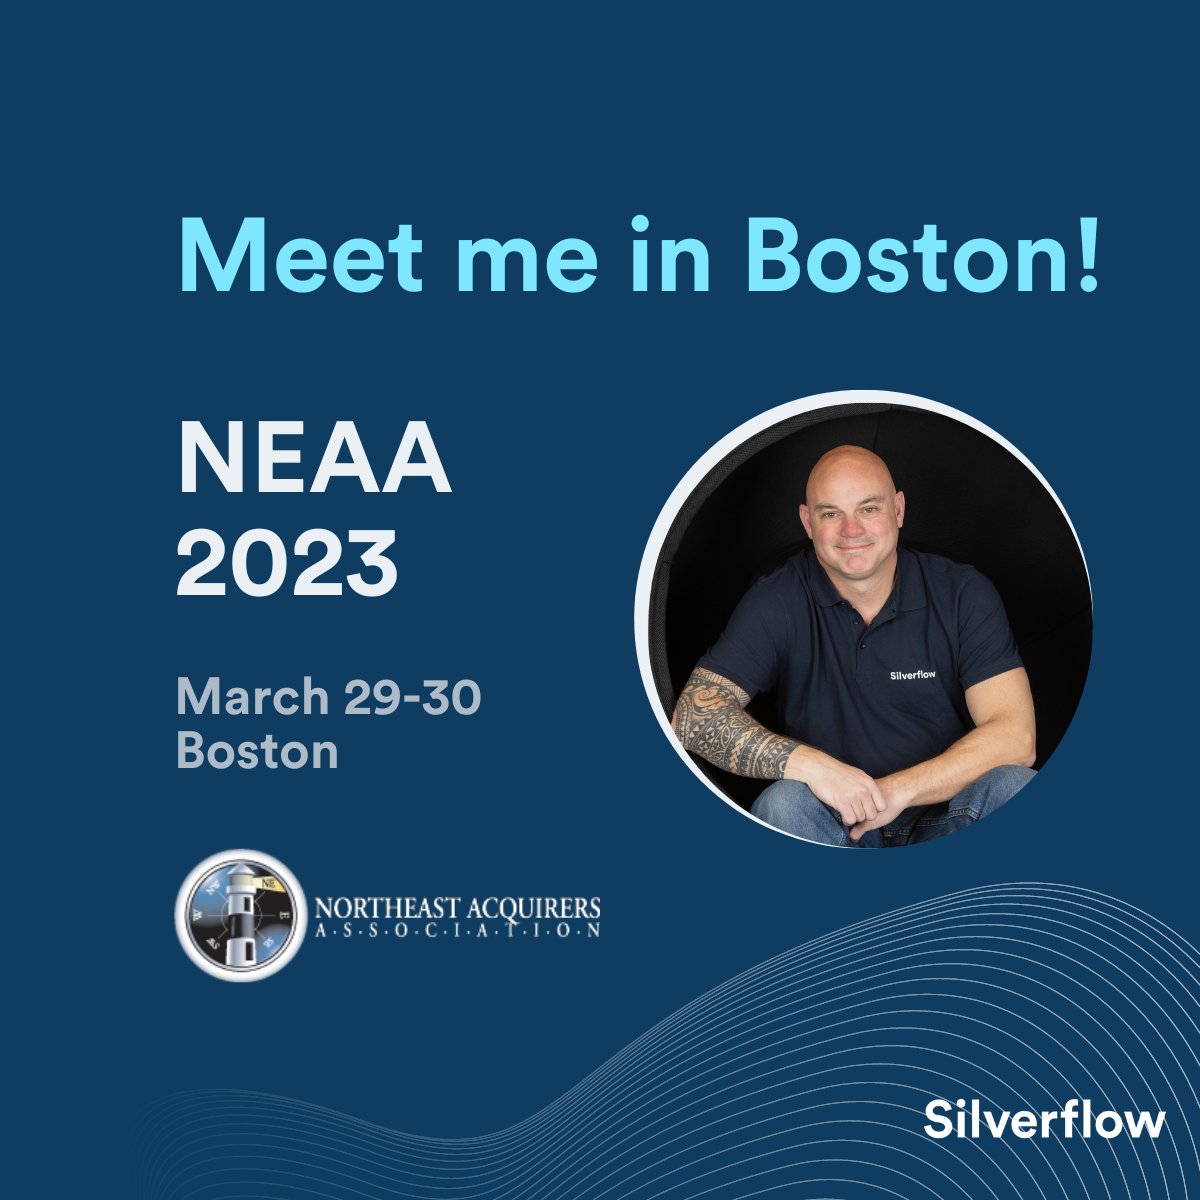 Meet me today at NEAA in Boston! Contact me today to set up some time.  eu1.hubs.ly/H035Qq00    

#NEAA #NEAA2023 #Silverflow #Fintech #startup #Boston #Payments